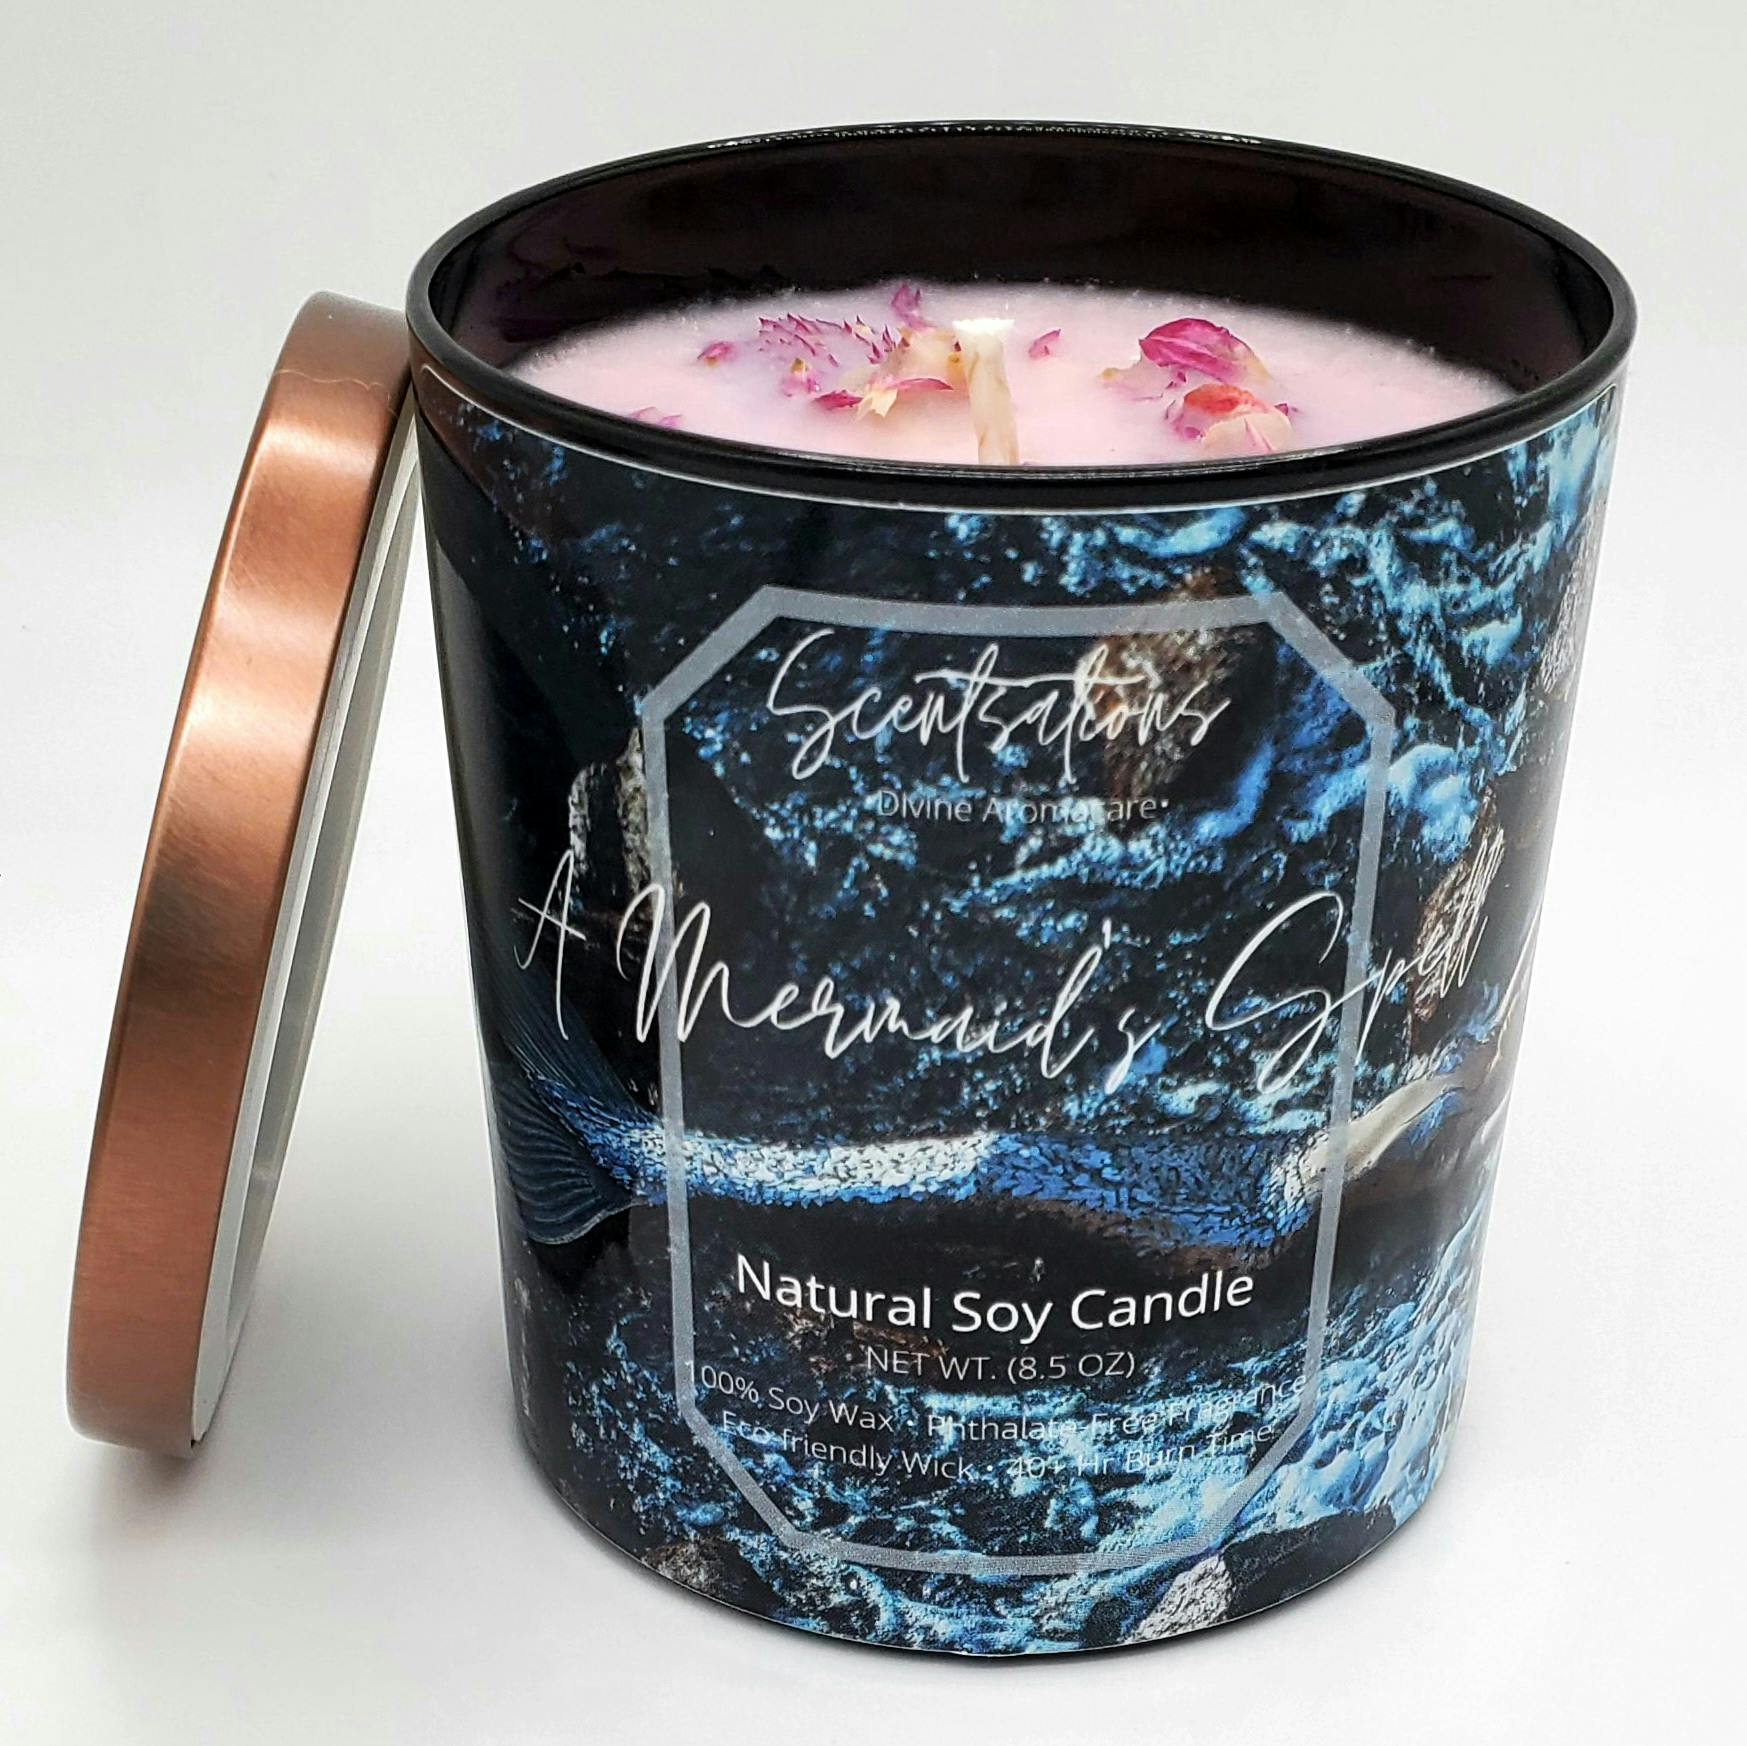 8.5 oz Natural Soy Wax Candle- Mermaid's Spell